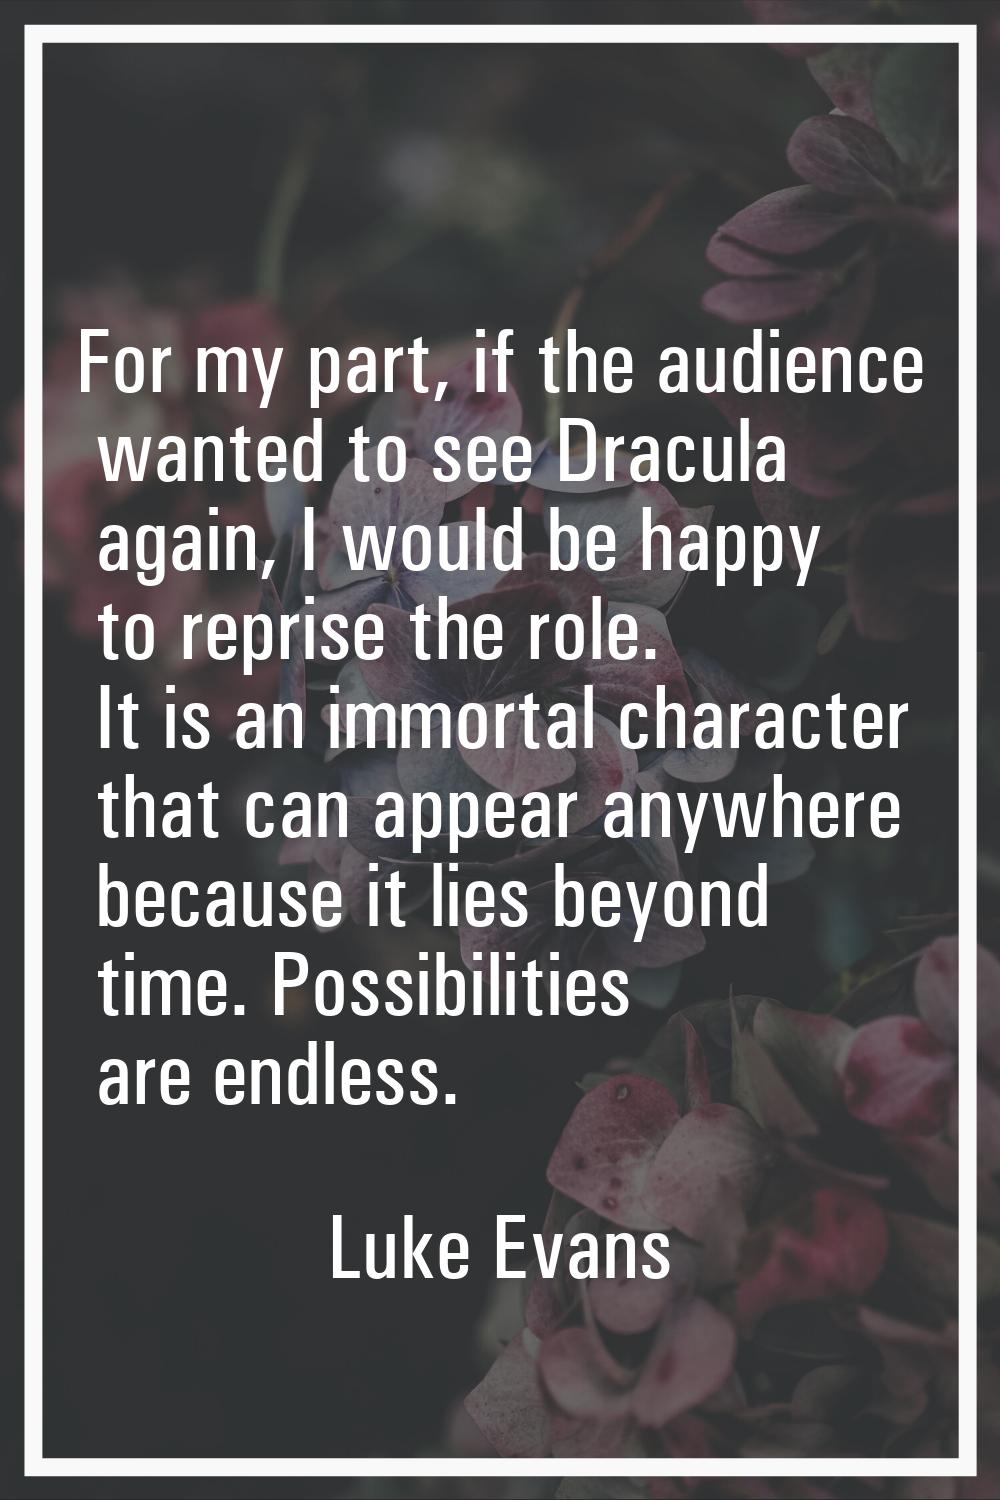 For my part, if the audience wanted to see Dracula again, I would be happy to reprise the role. It 